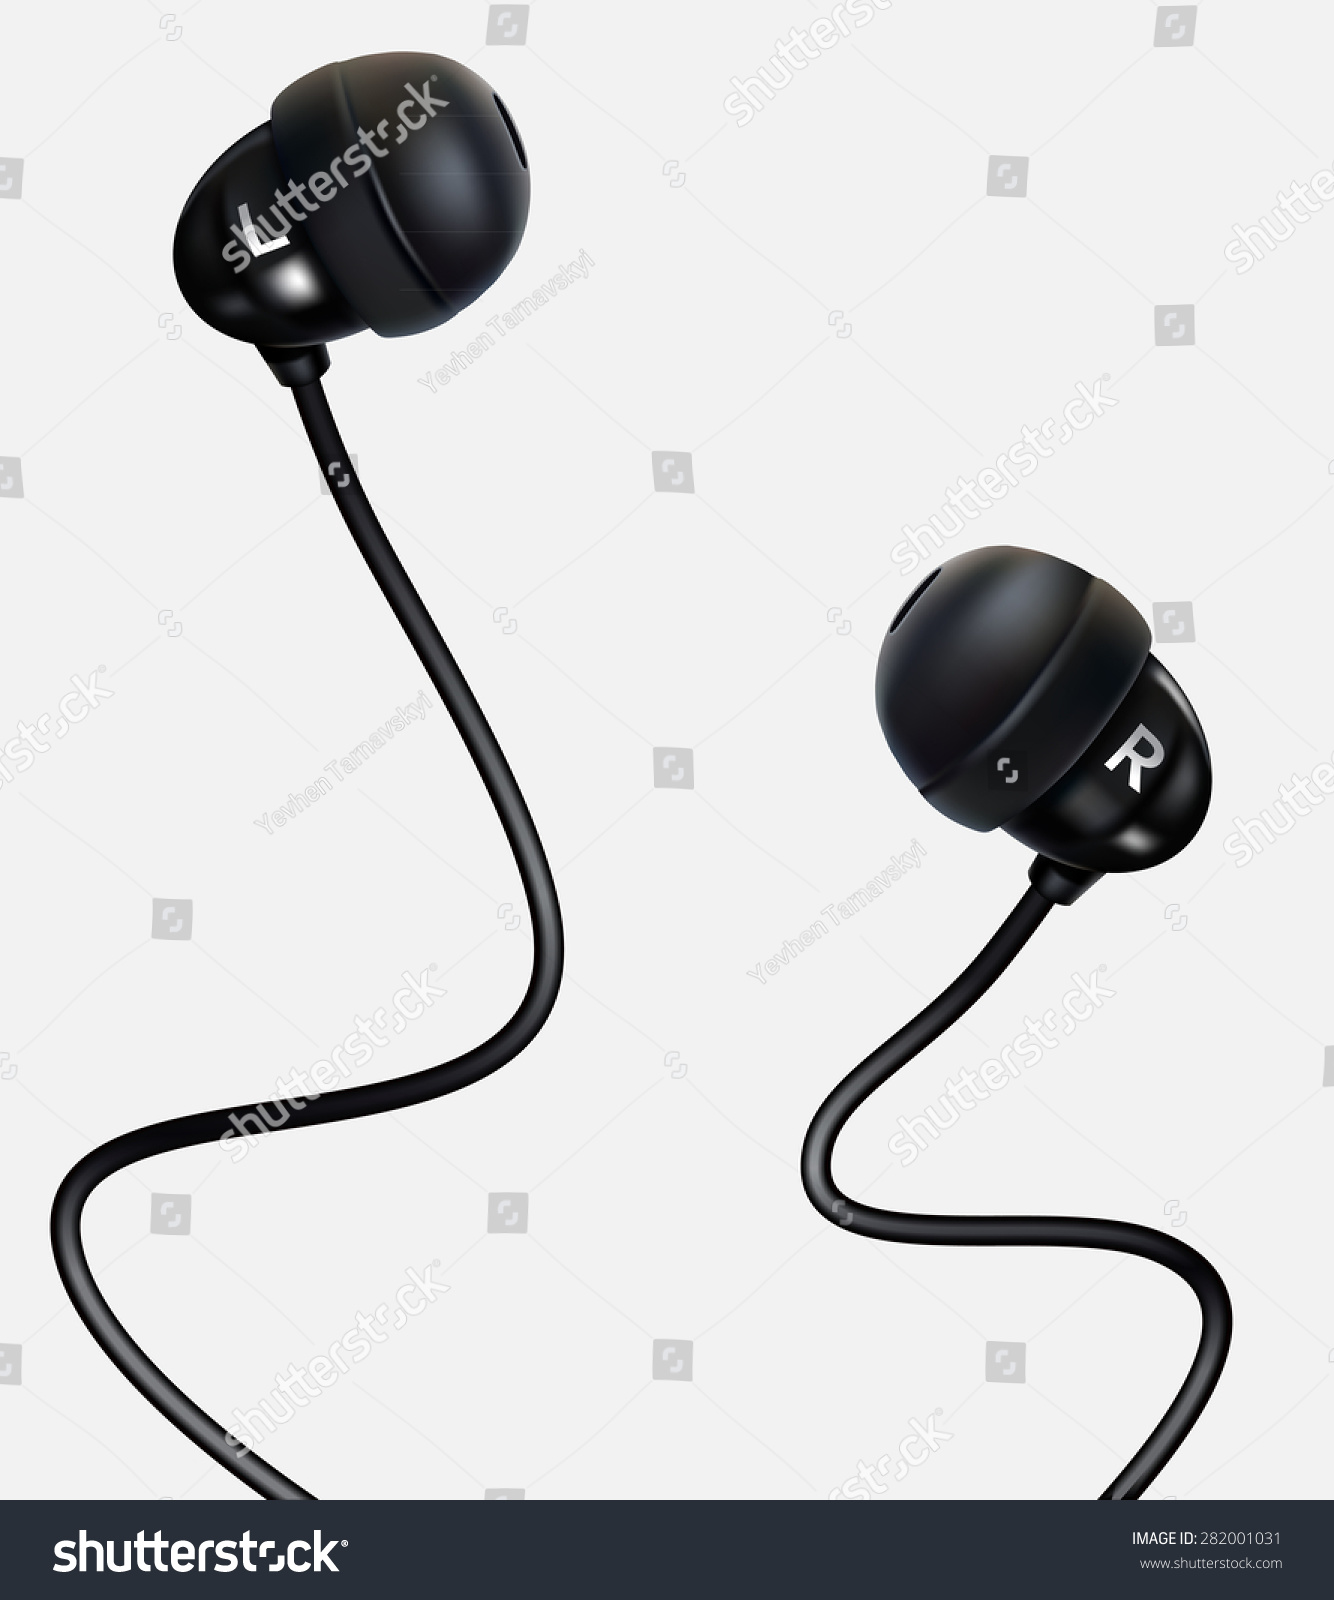 Vector. Earphones Isolated On The White Background. - 282001031